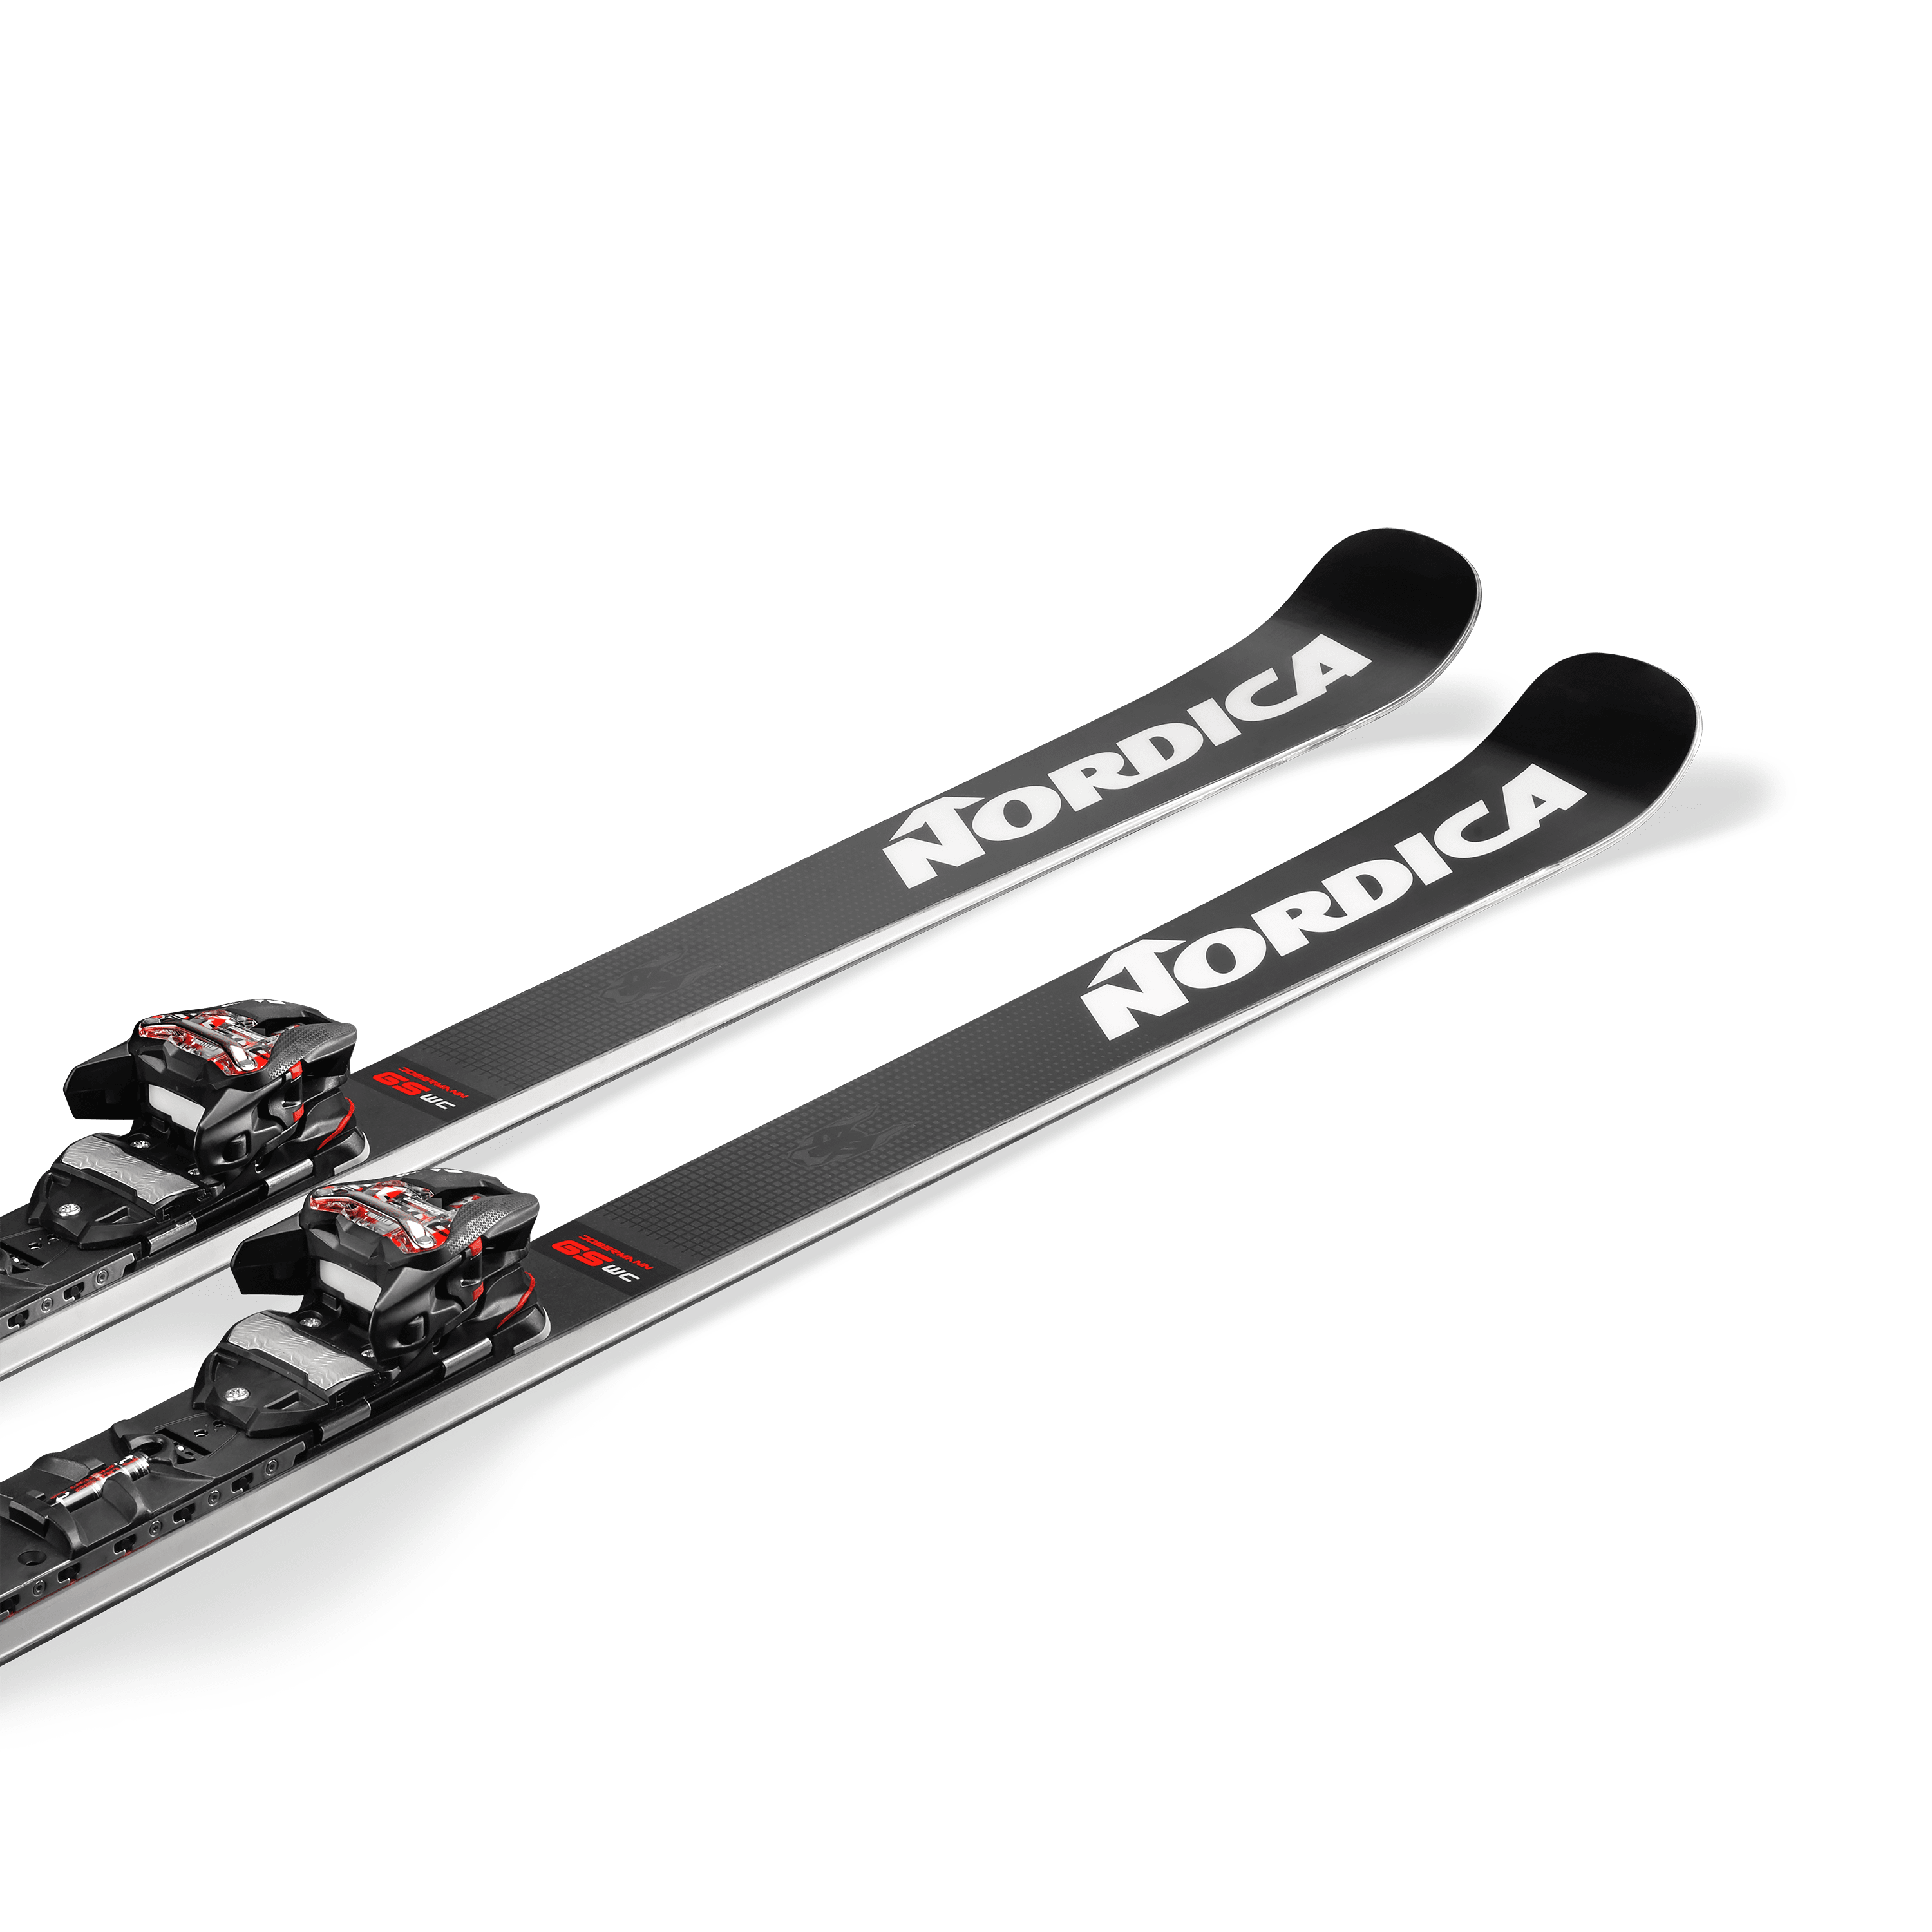 Picture of the Nordica Dobermann gs race plate skis.